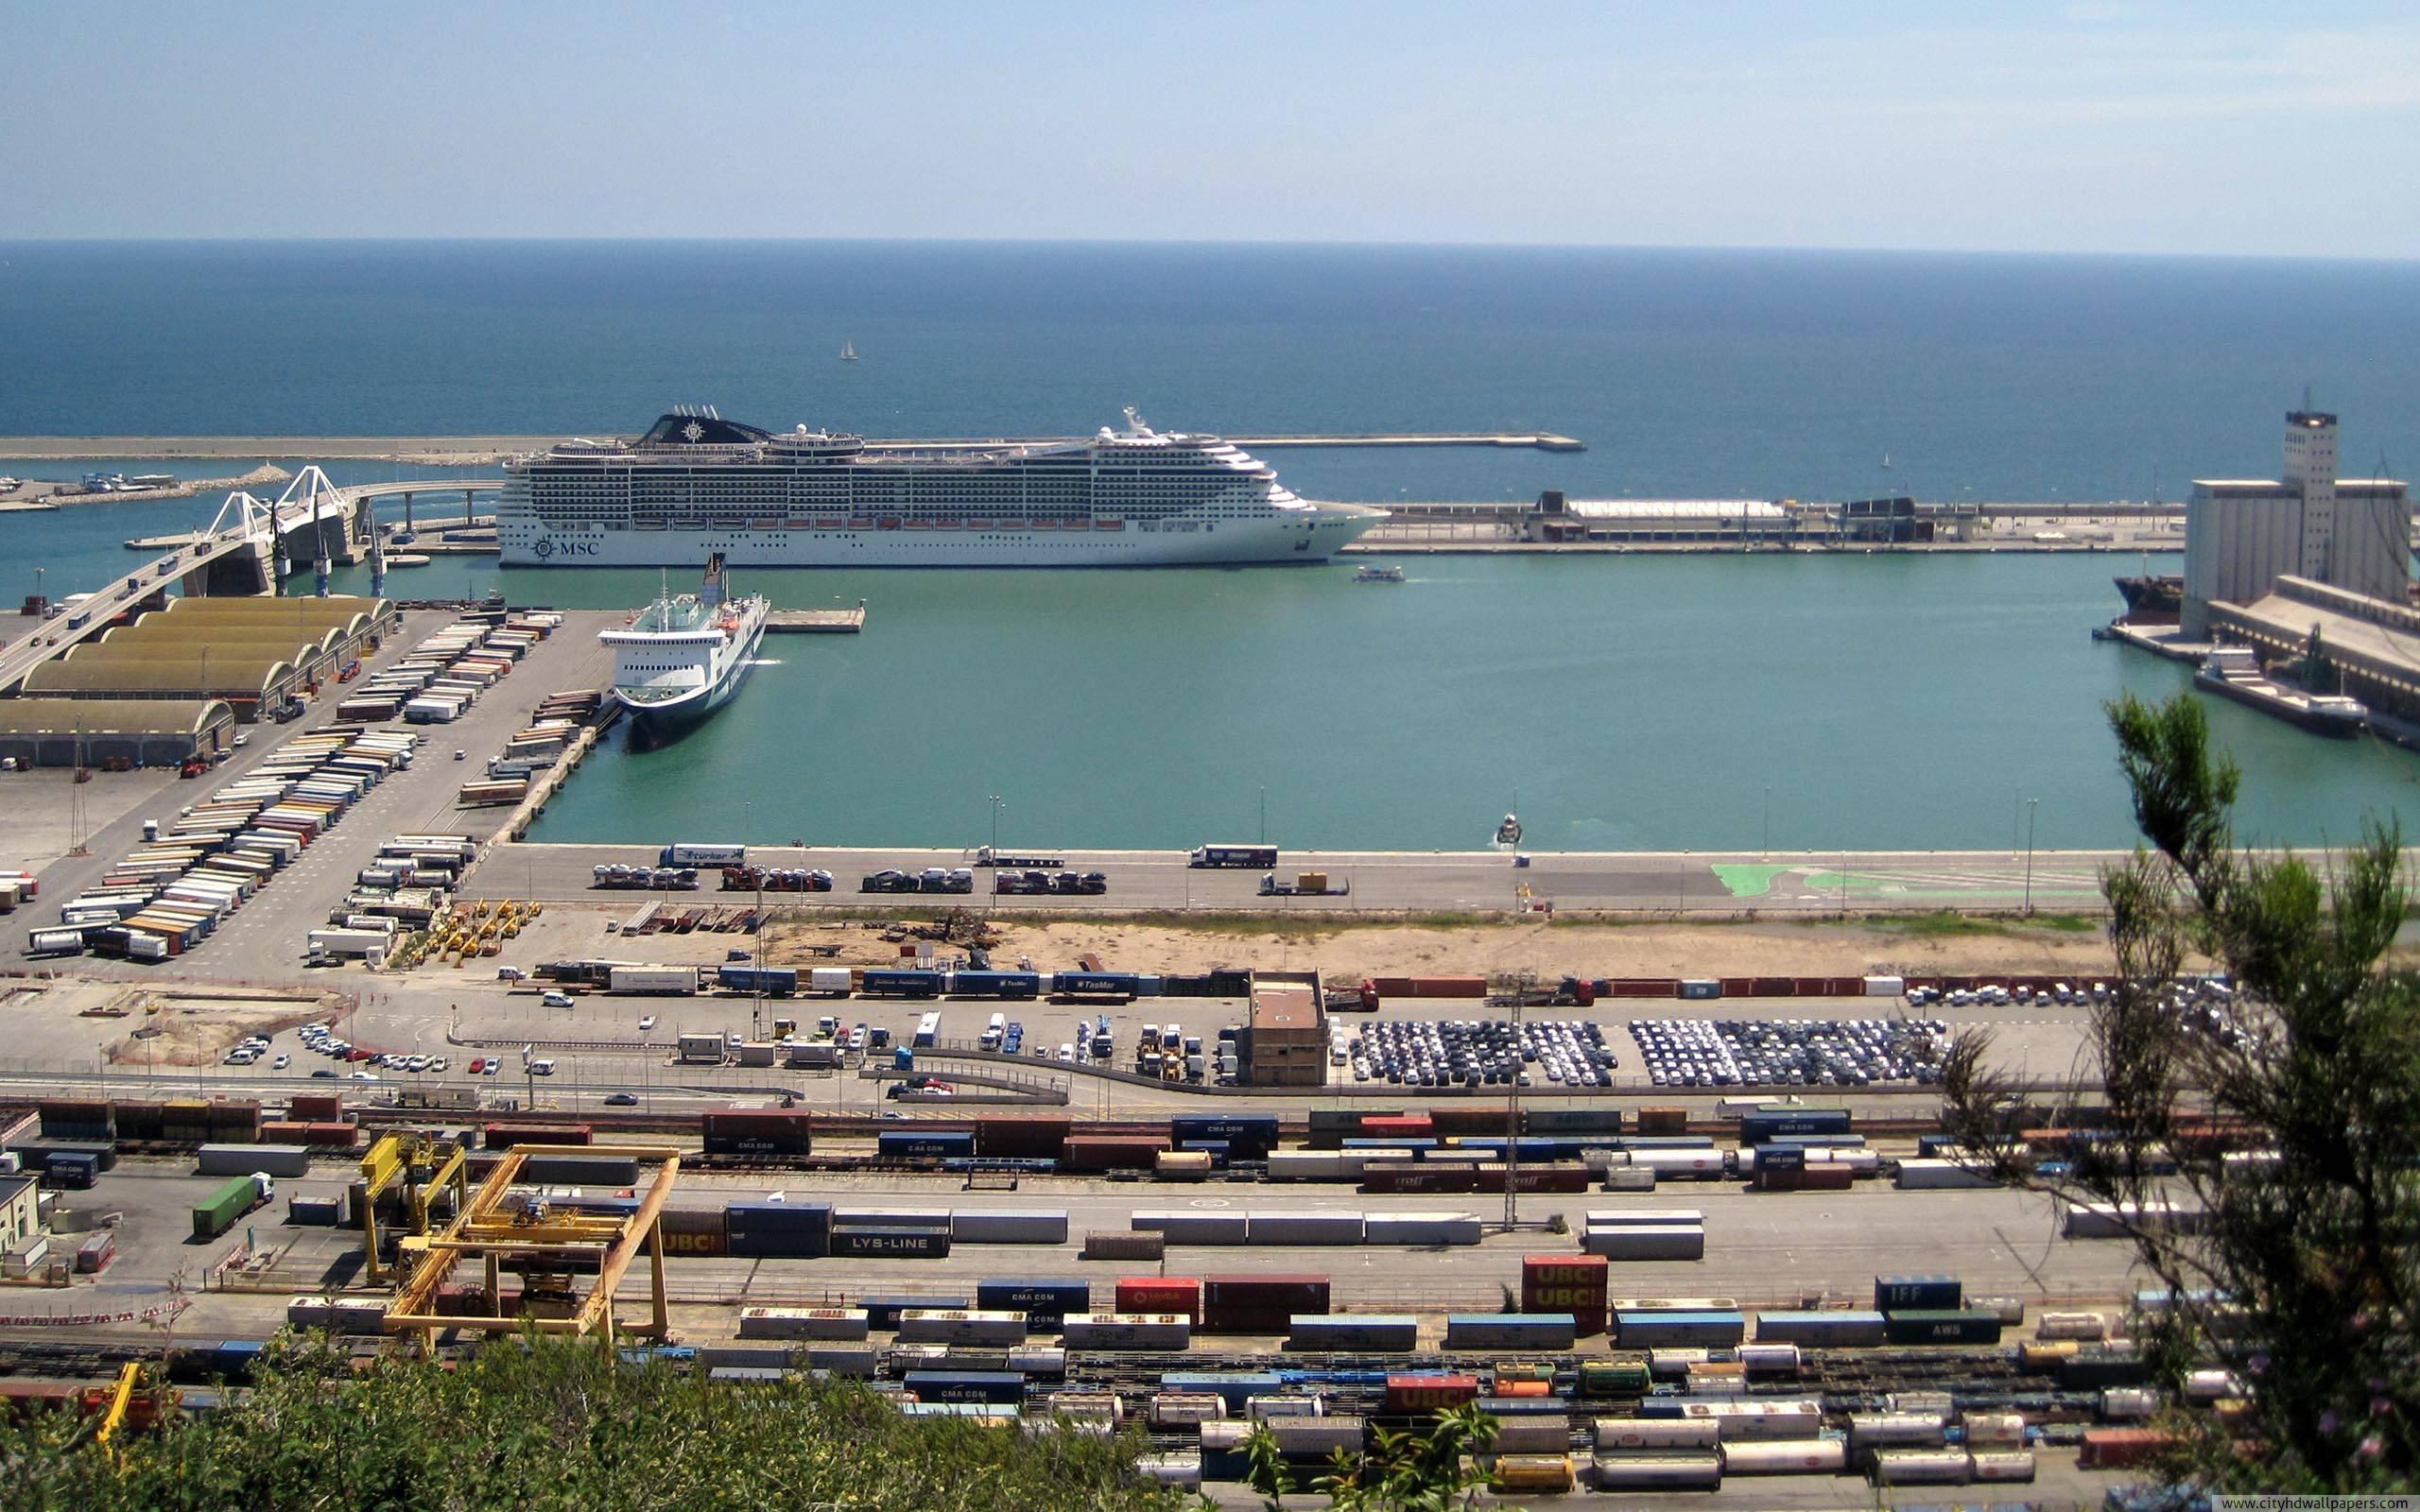 The container terminal in port of Barcelona city